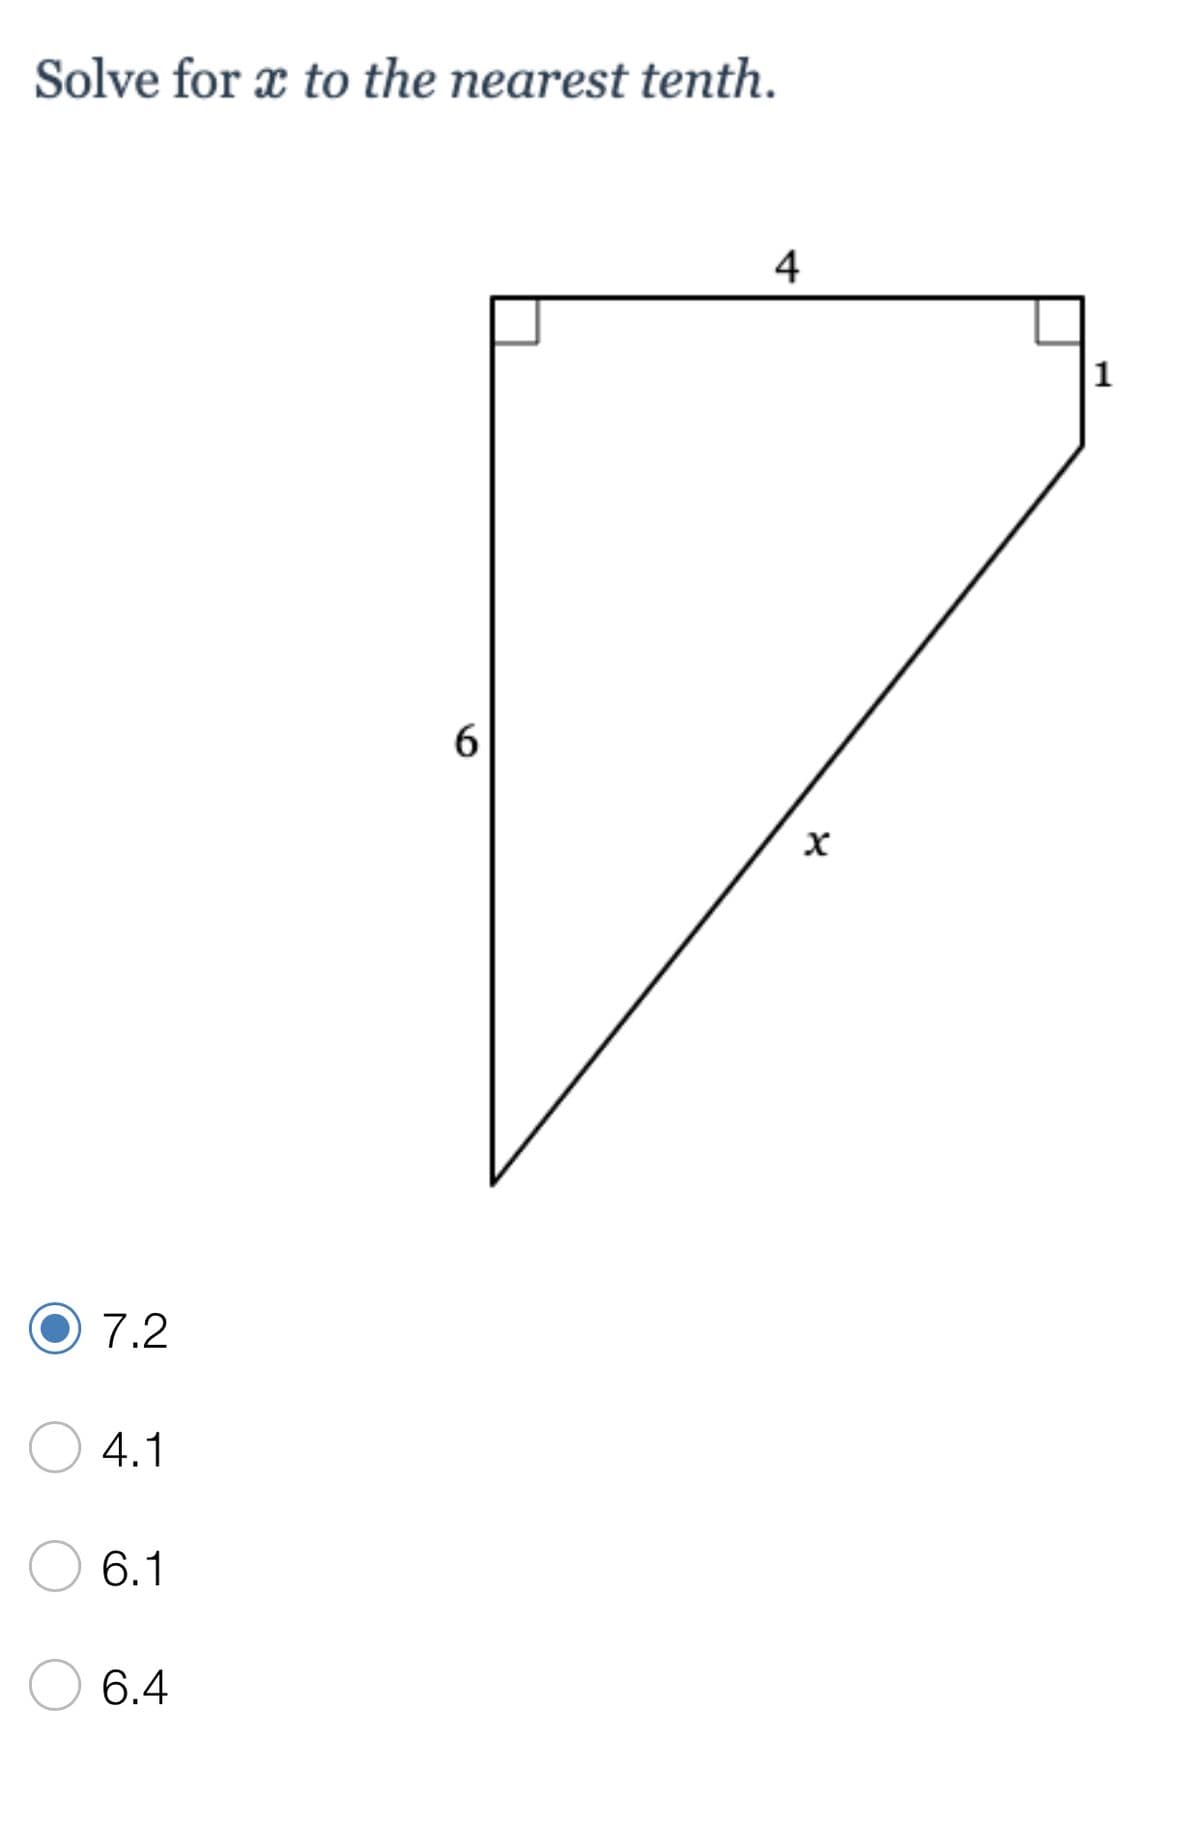 ### Problem:
**Solve for \( x \) to the nearest tenth.**

#### Diagram:
The diagram shows a right triangle with the following measurements:
- The length of one leg is 6 units.
- The length of the other leg is \(4 + 1 = 5\) units.
- The hypotenuse is labeled as \( x \).

#### Steps to Solve:
To find the value of \( x \), we can use the Pythagorean theorem, which states that in a right triangle:
\[ a^2 + b^2 = c^2 \]
where \( a \) and \( b \) are the legs of the triangle, and \( c \) is the hypotenuse.

For the given triangle:
- \( a = 6 \)
- \( b = 5 \)
- \( c = x \)

Now, substitute the given side lengths into the Pythagorean theorem:
\[ 6^2 + 5^2 = x^2 \]
\[ 36 + 25 = x^2 \]
\[ 61 = x^2 \]

To solve for \( x \), take the square root of both sides:
\[ x = \sqrt{61} \]
\[ x \approx 7.81 \]

Rounding to the nearest tenth, we get:
\[ x \approx 7.8 \]

However, the marked correct option is 7.2 which is incorrect based on our previous calculation. 

**Selecting an Answer:**
- 7.2
- 4.1
- 6.1
- 6.4

### Explanation:

Though the provided answers do not include the correct calculation as \(7.8\), marking an error out of the provided options is necessary, as the correct approximation should indeed be \(7.8\).